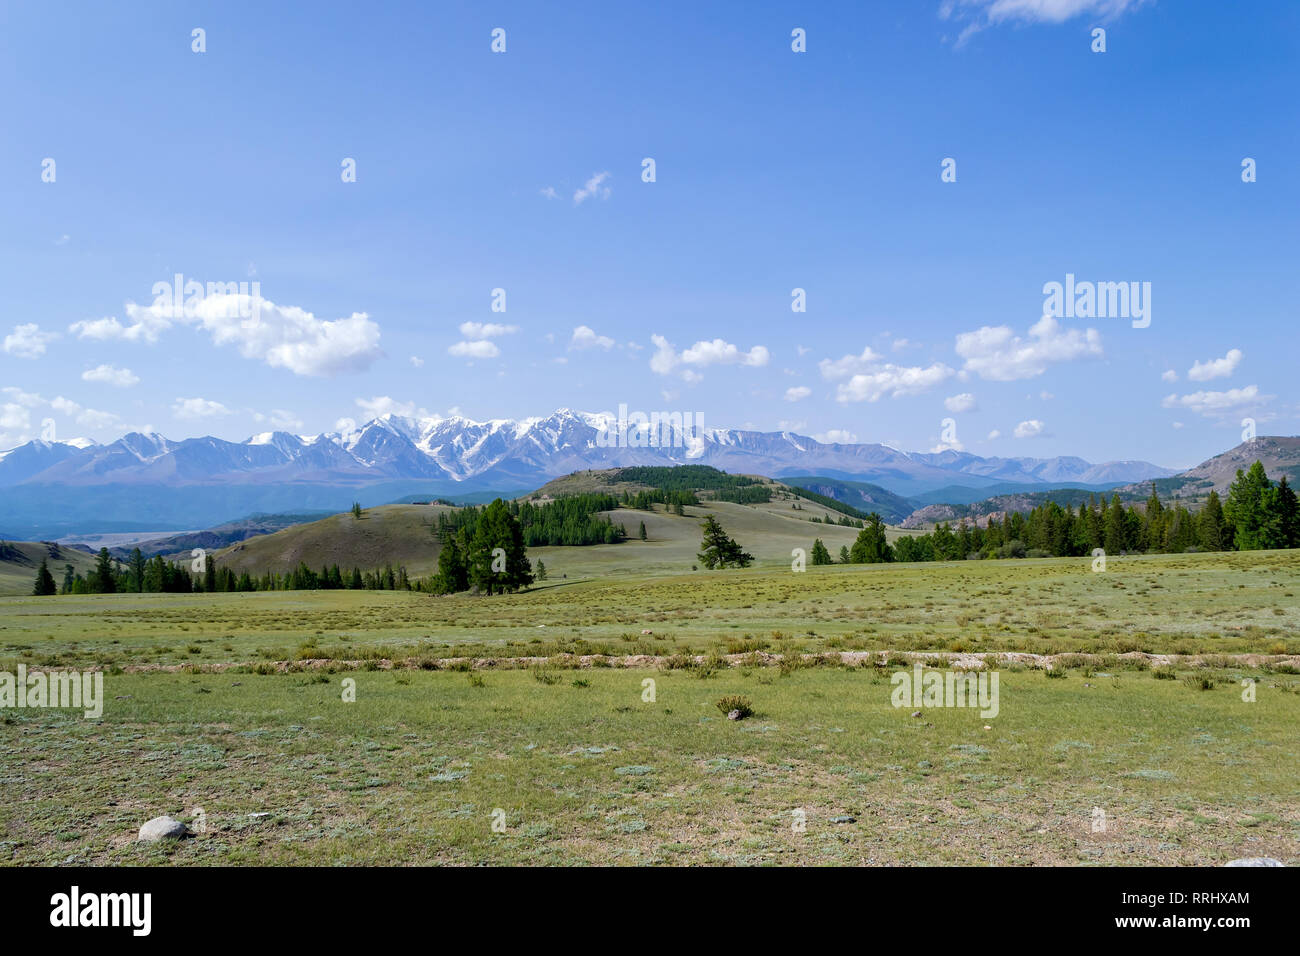 A meadow with lush green grass and coniferous trees stretching in front of the stone ridge of snow-capped peaks, a mountain range in a blue haze and w Stock Photo